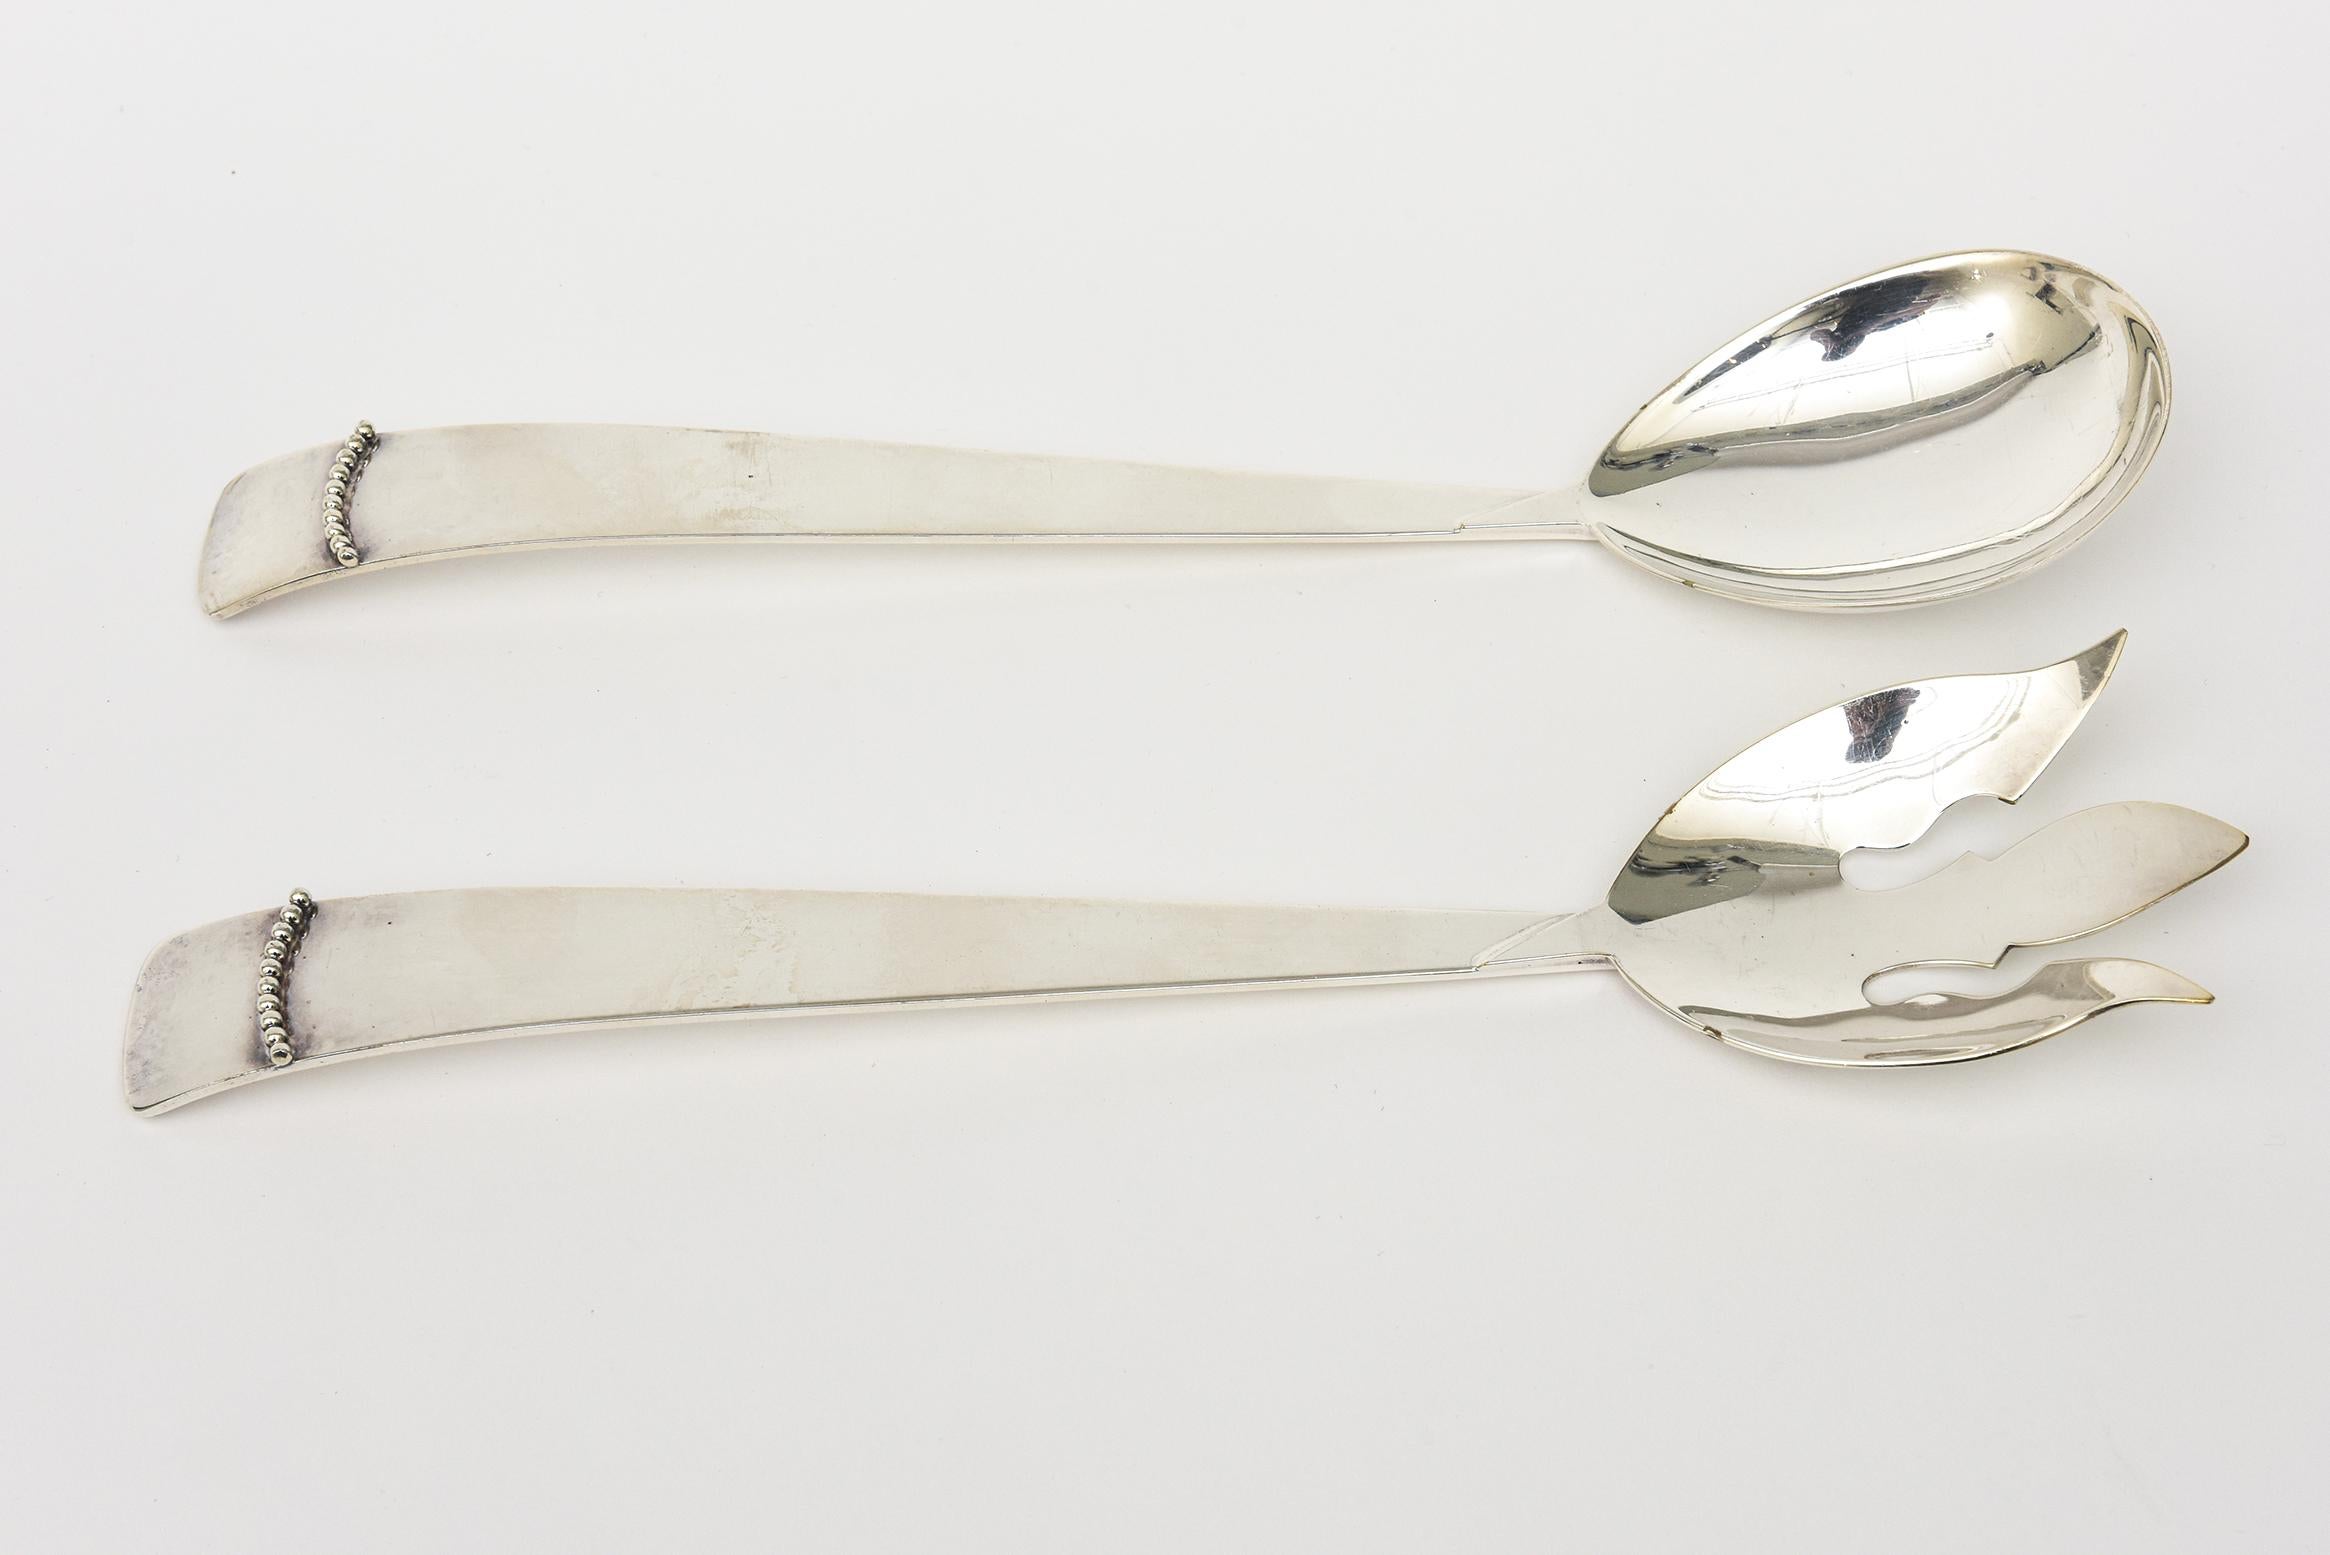 Vintage Silver-Plate Hallmarked Salad Servers or Serving Pieces Pair Of For Sale 2